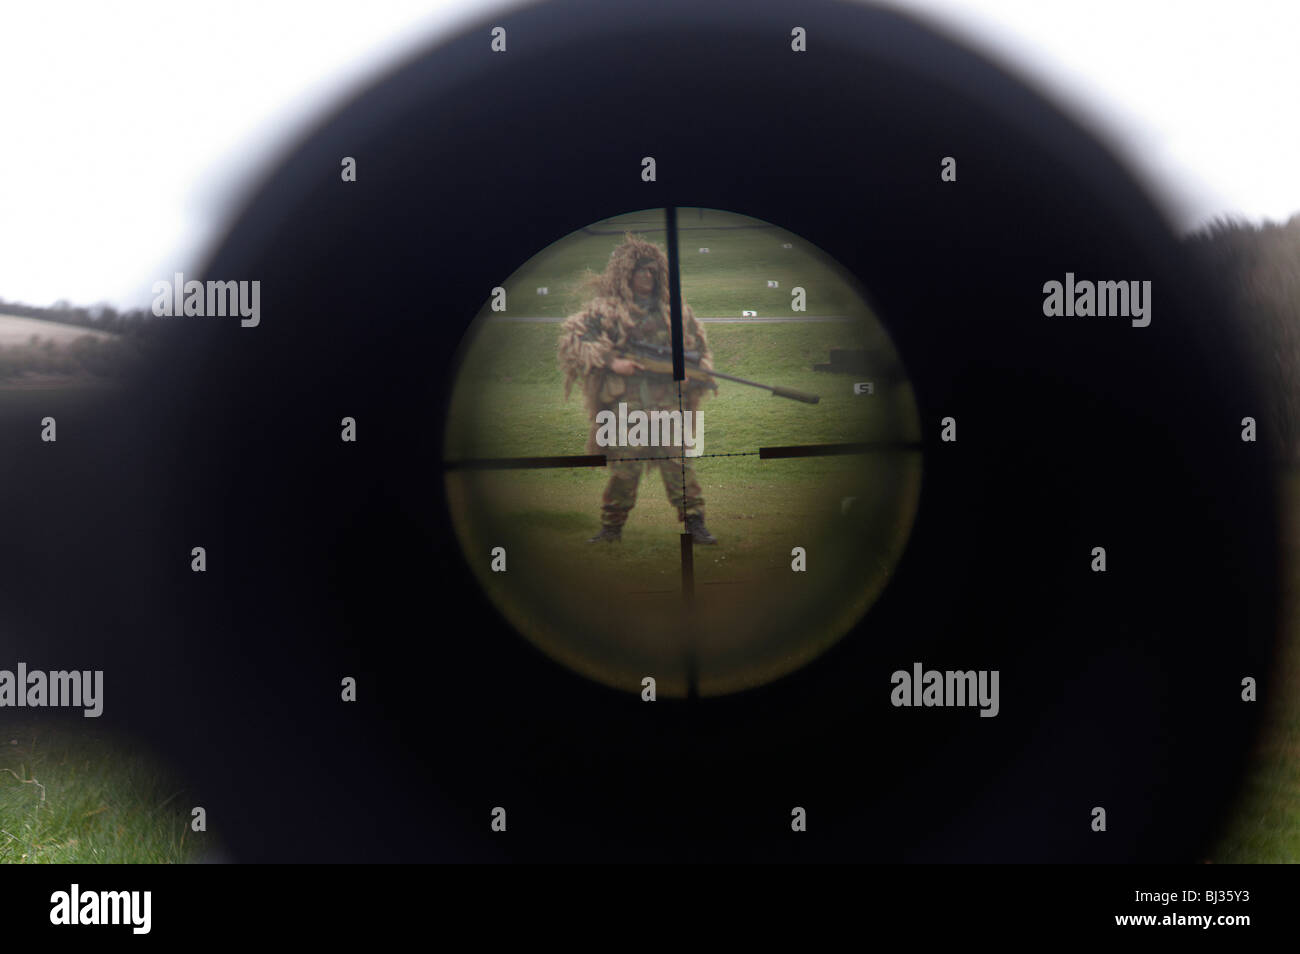 Looking down the telescopic sight of the new British-made Long Range L115A3 sniper rifle. Stock Photo